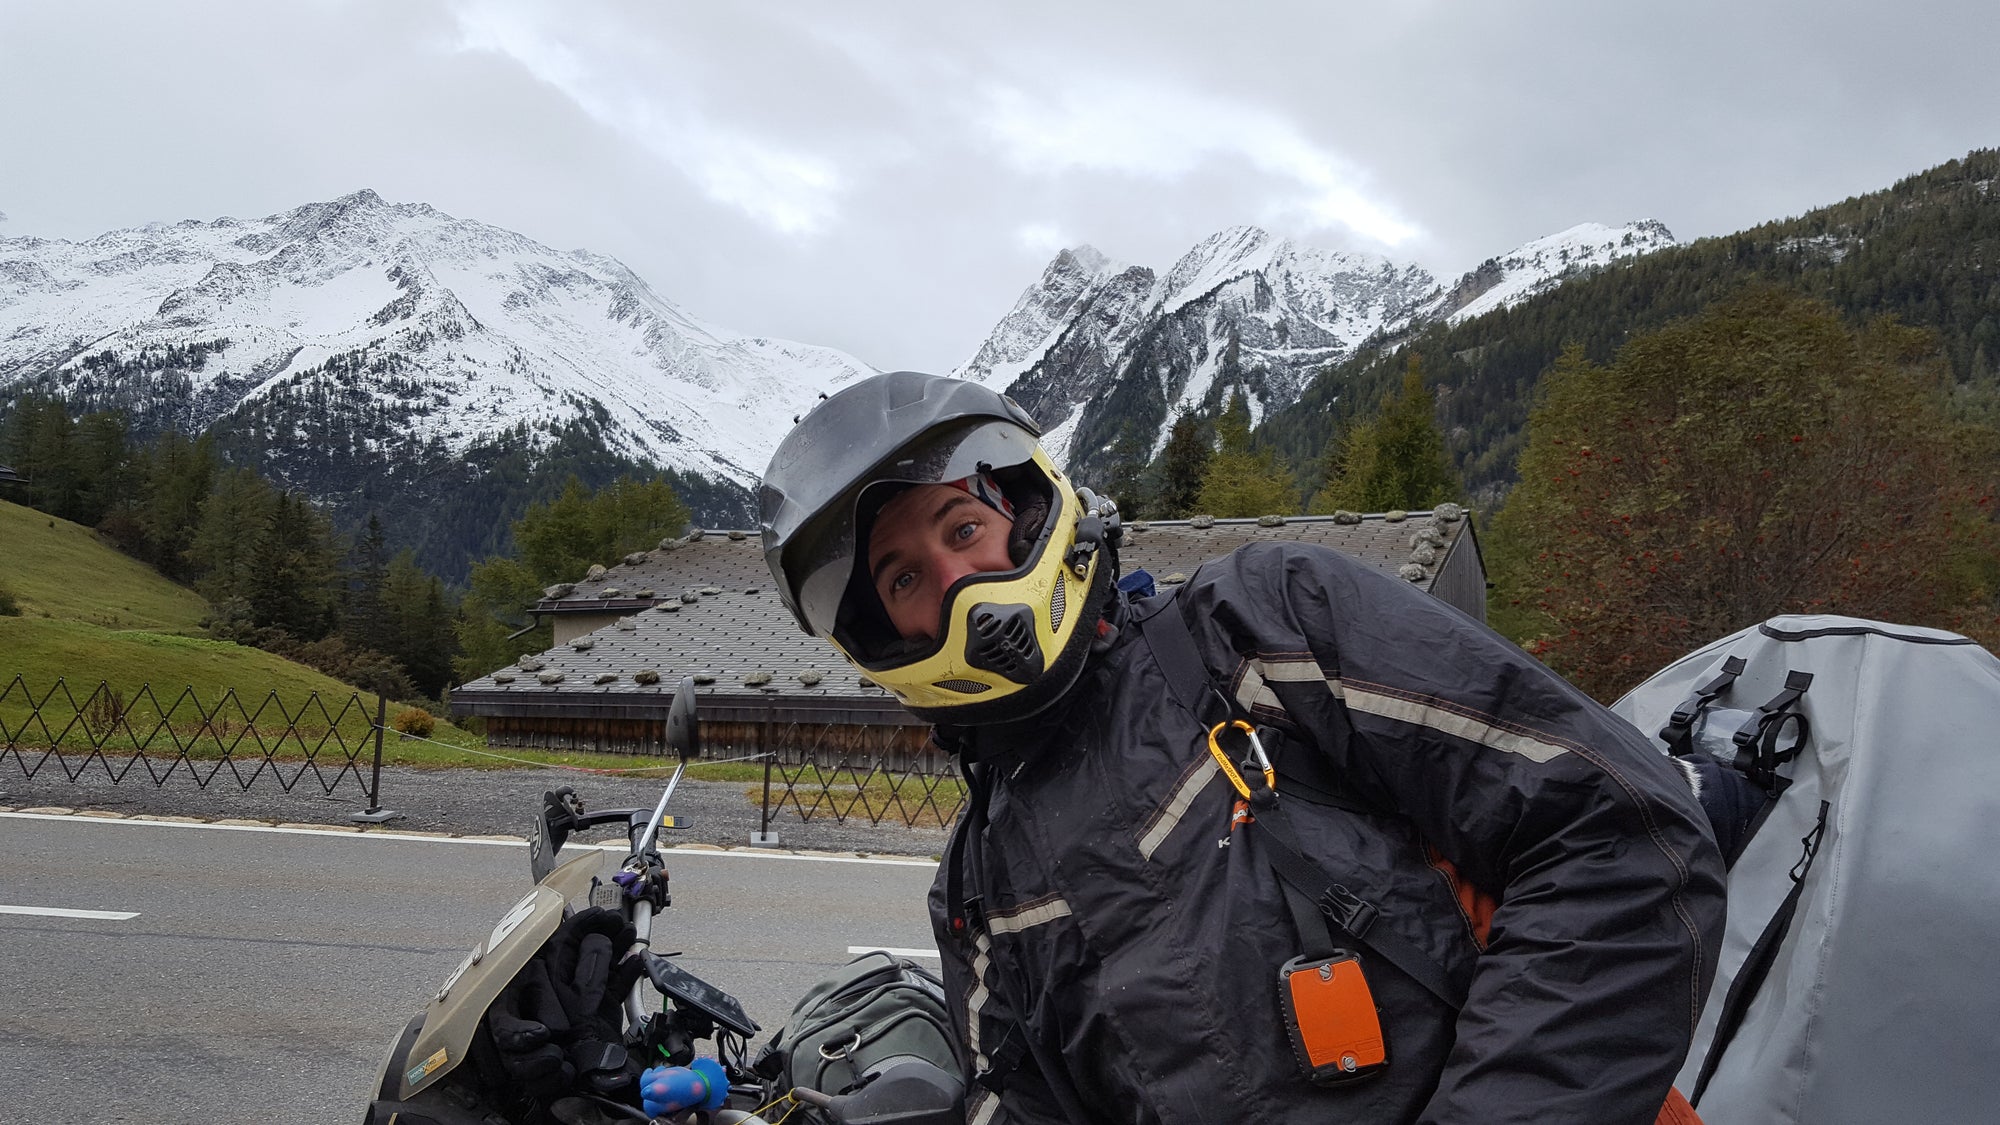 It was cold riding the Swiss Alps in October. But not too cold for Stu to ruin a perfectly nice photo of the snow capped mountains.